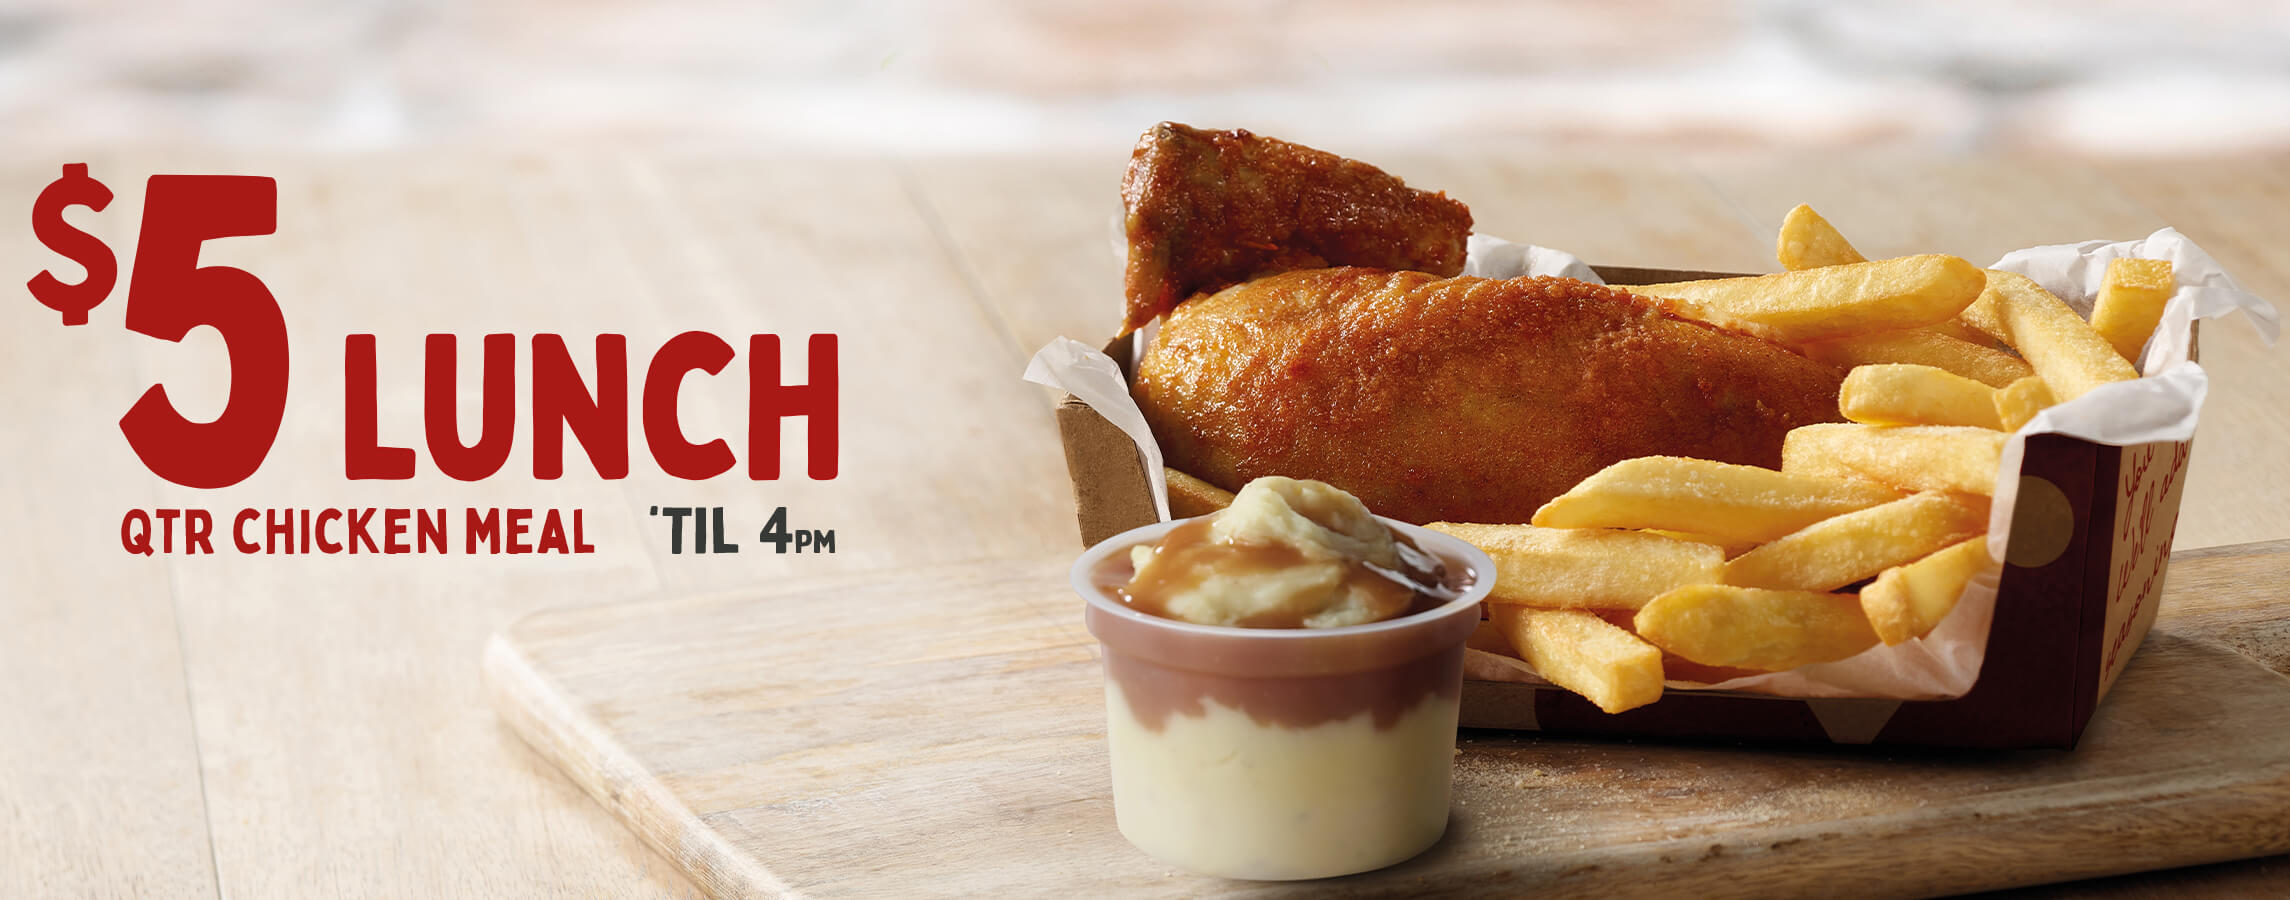 Red Rooster $5 Lunch Qtr chicken meal till 4 pm(In-Store)